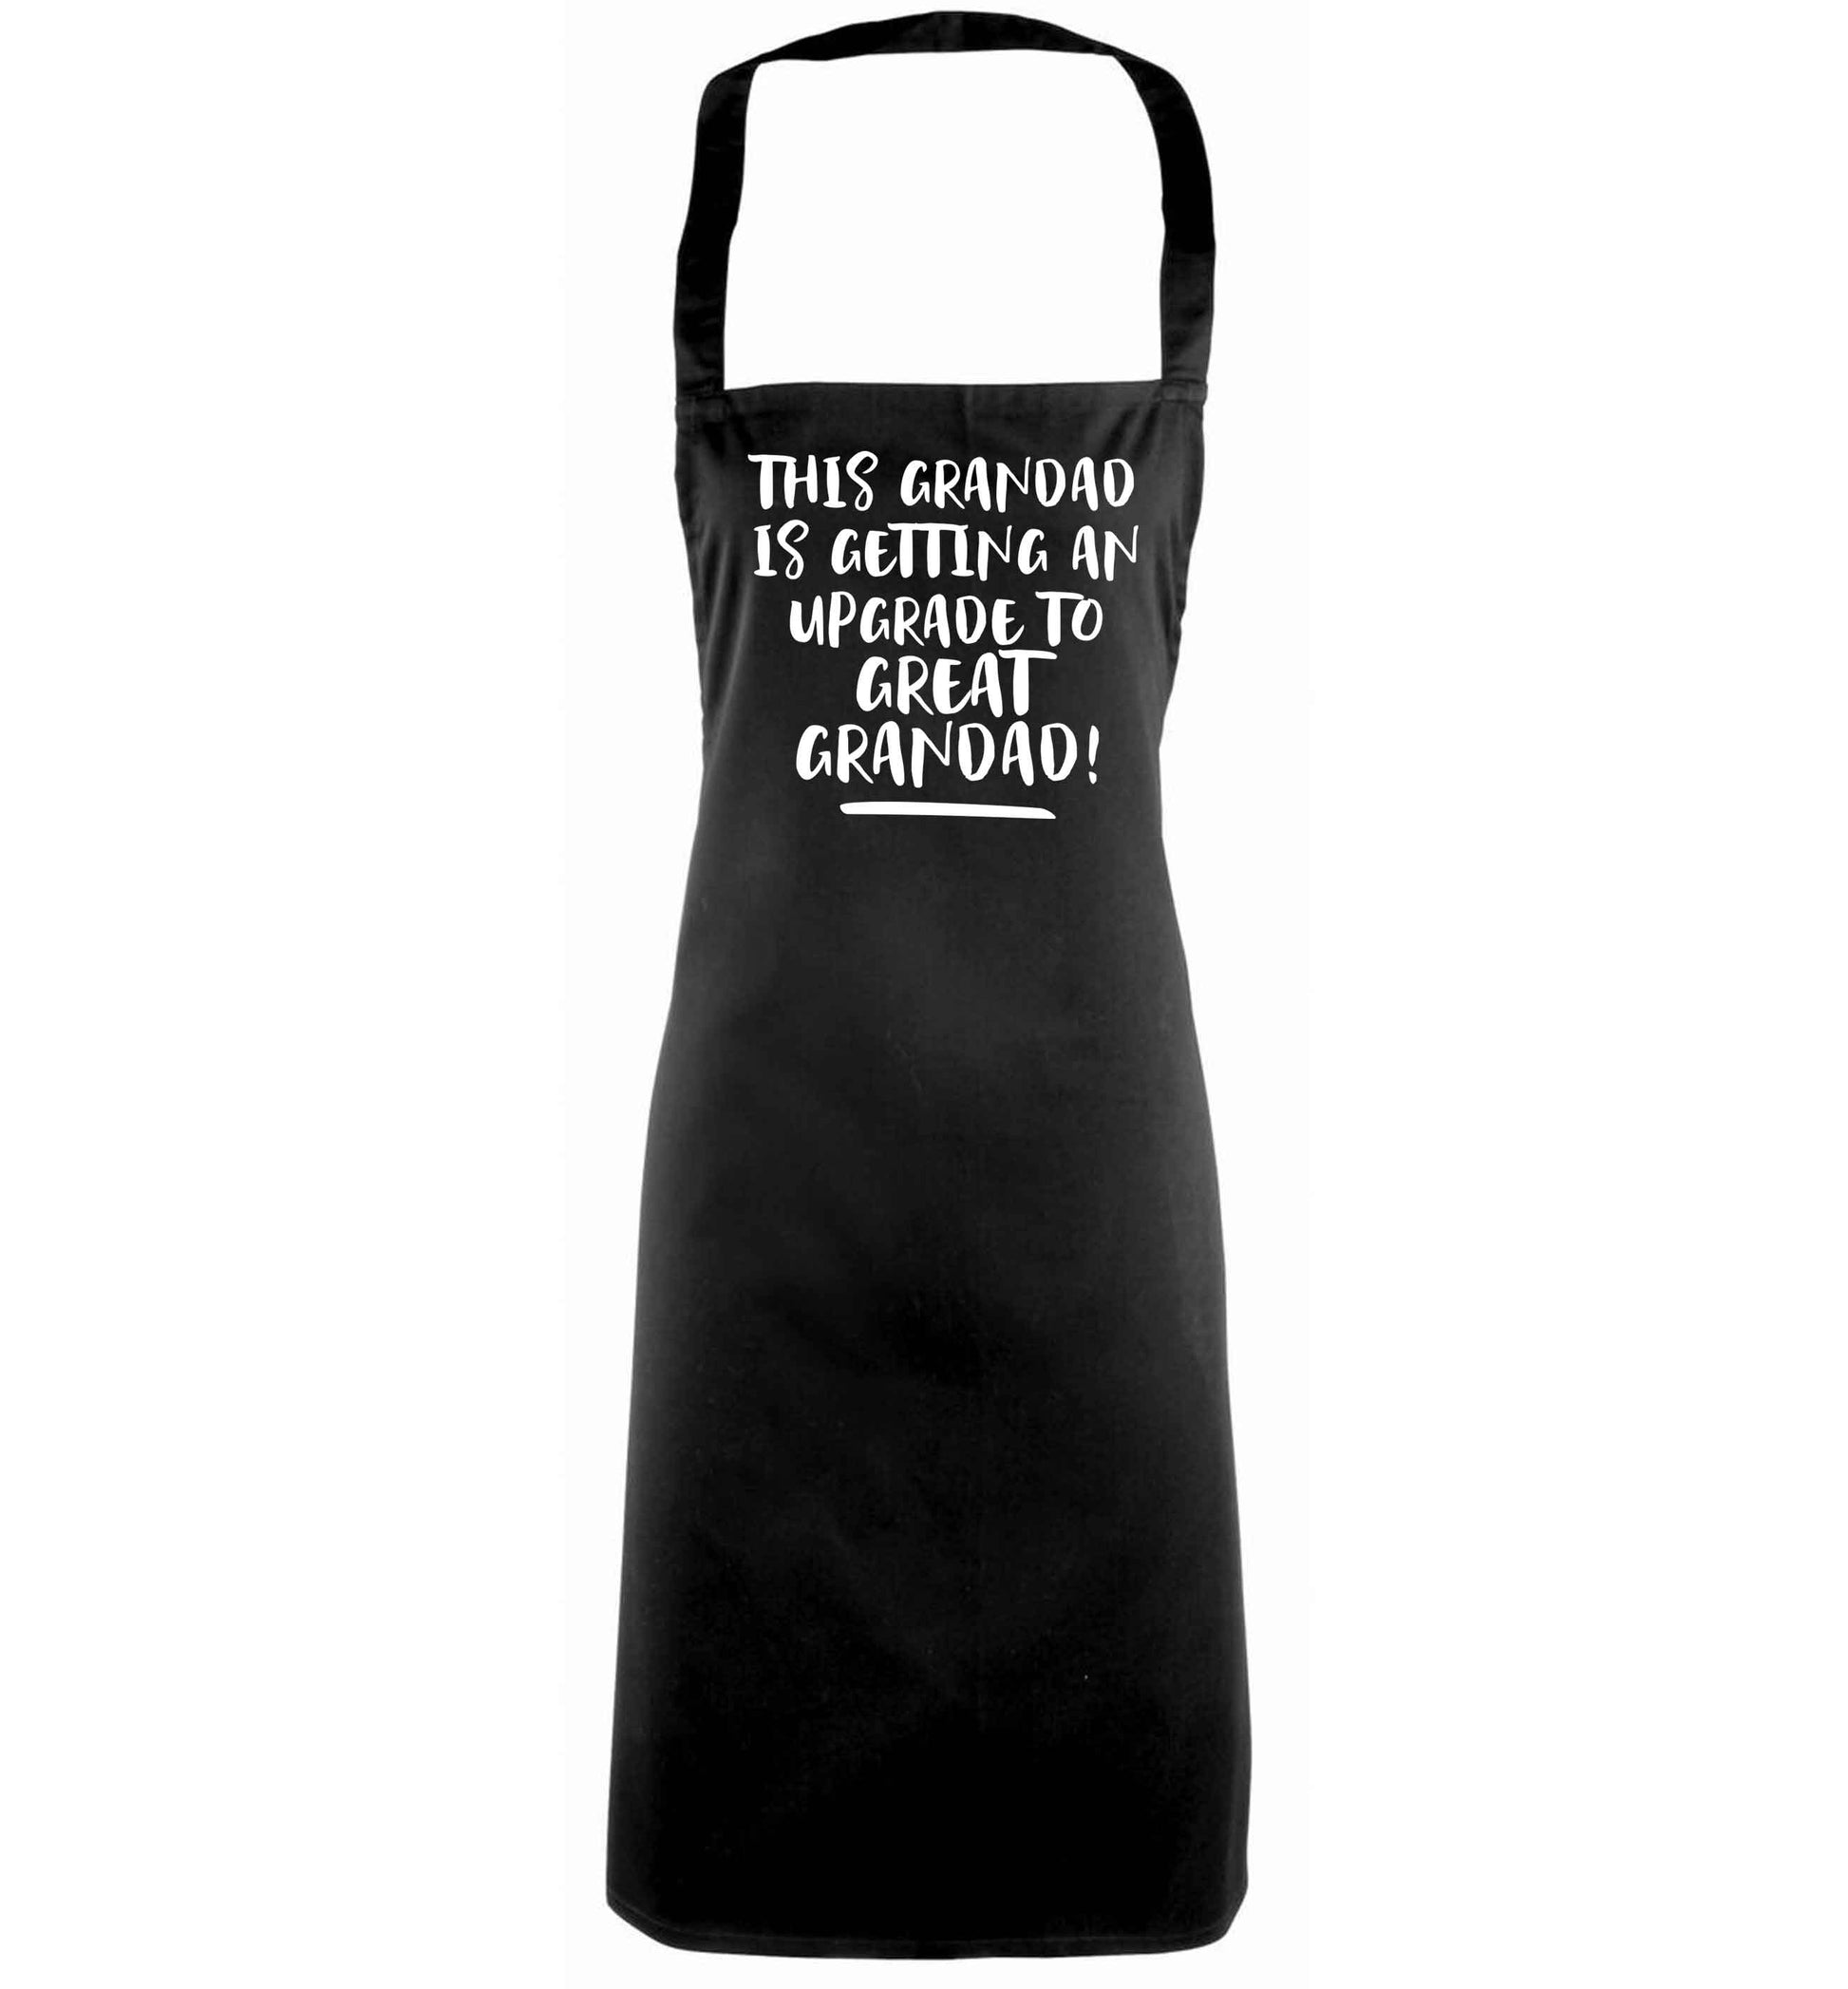 This grandad is getting an upgrade to great grandad! black apron